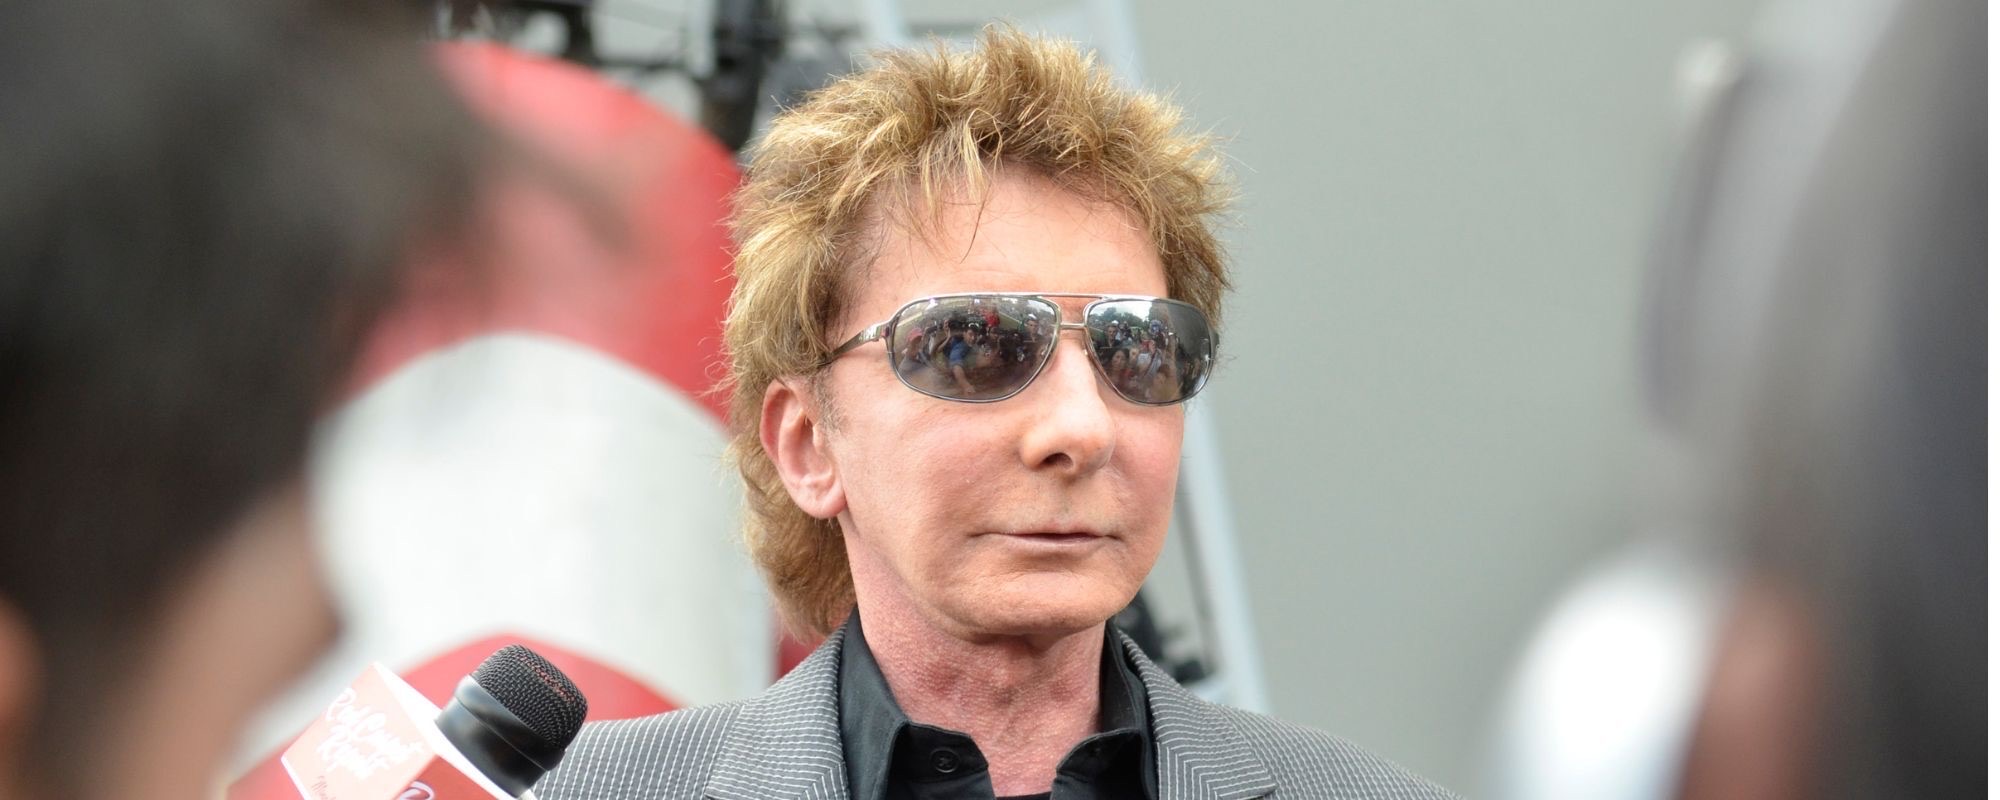 Barry Manilow Pens Heartbreaking Tribute Over Death of ‘American Idol’ & ‘The Voice’ Coach